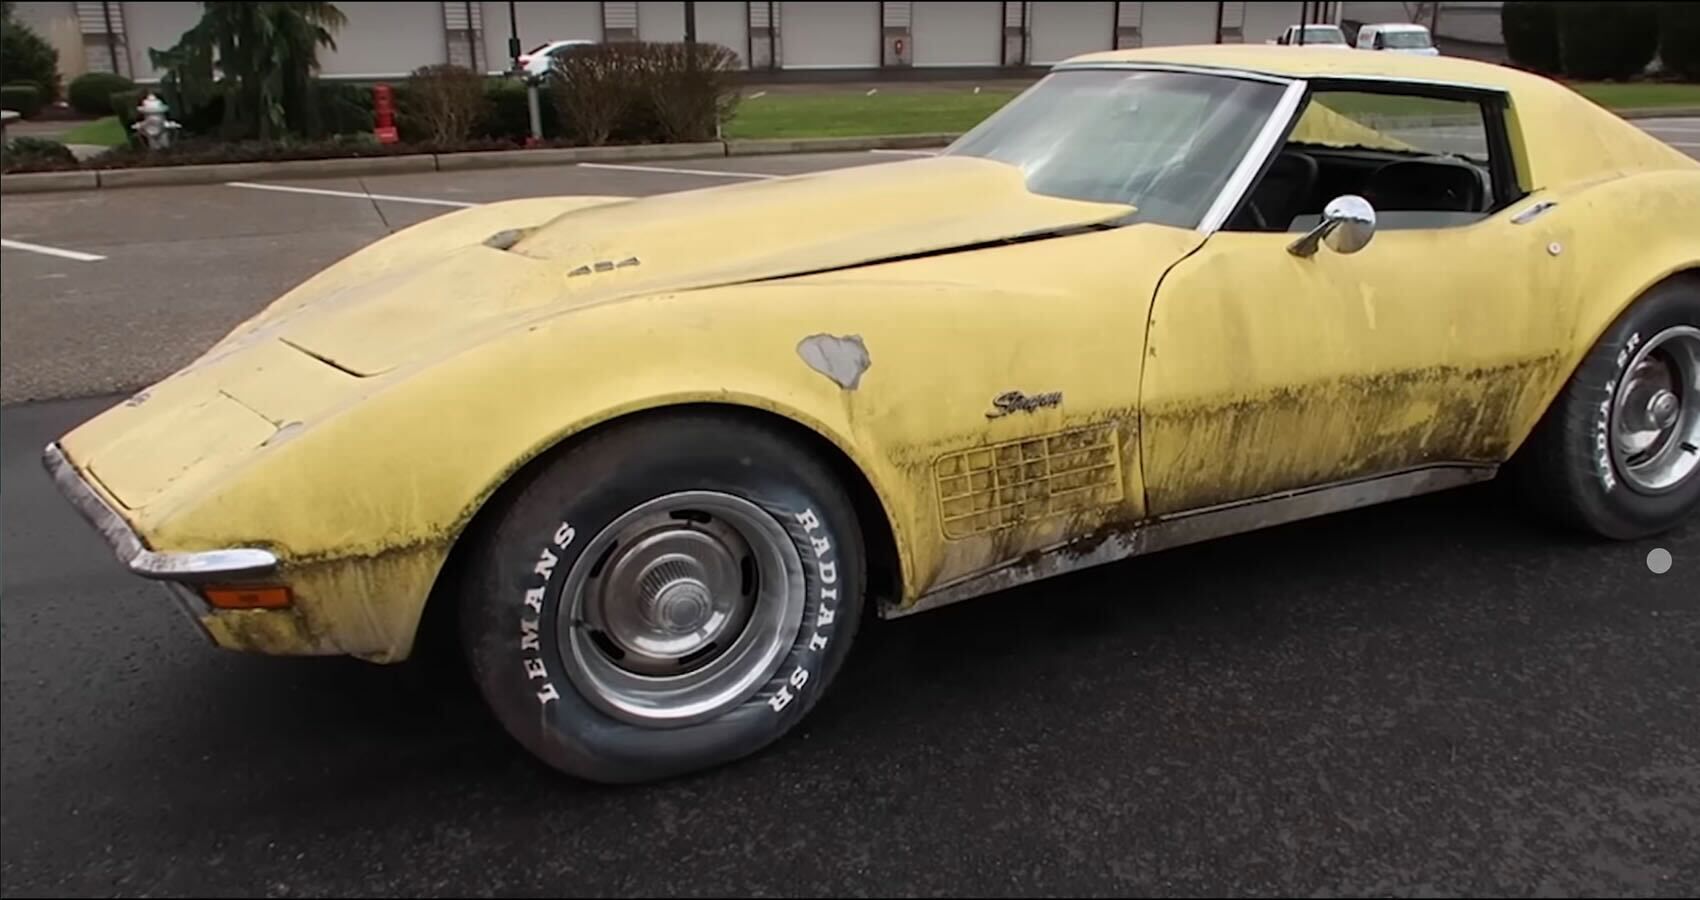 Watch This Filthy 1970 Chevrolet Corvette Barn Find Cleanup Surprisingly Well